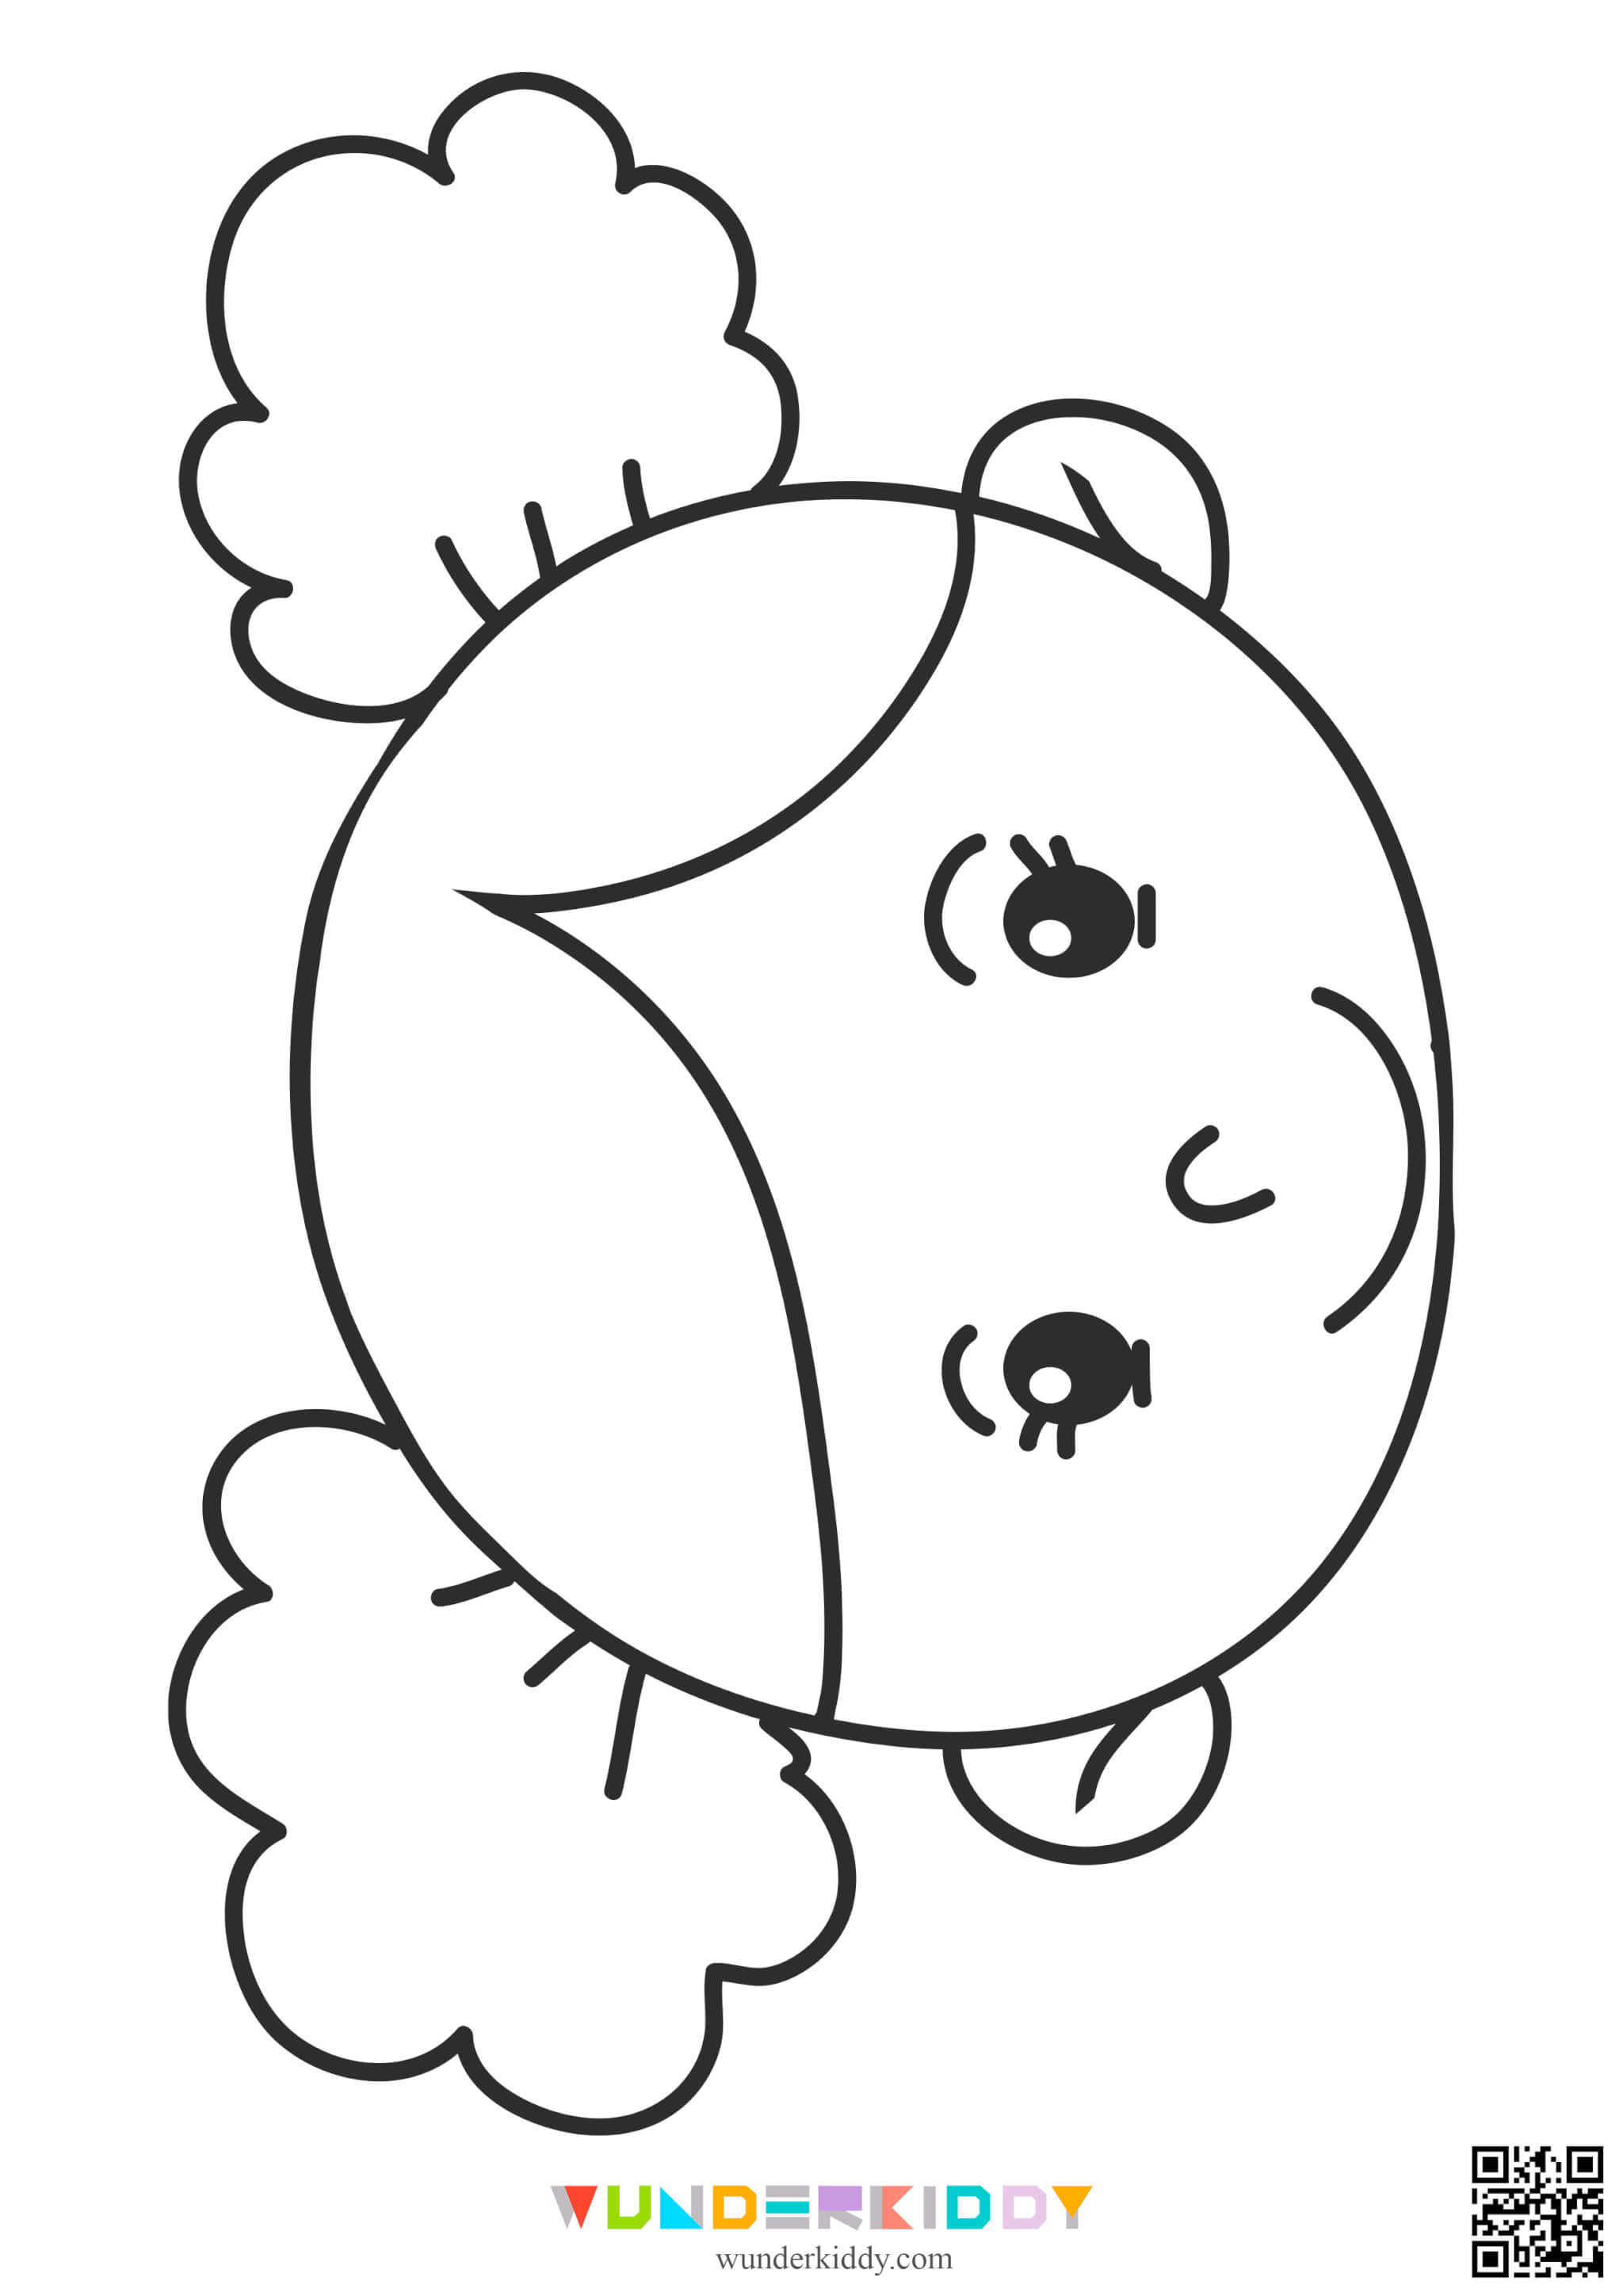 Printable simple coloring pages of faces for toddlers